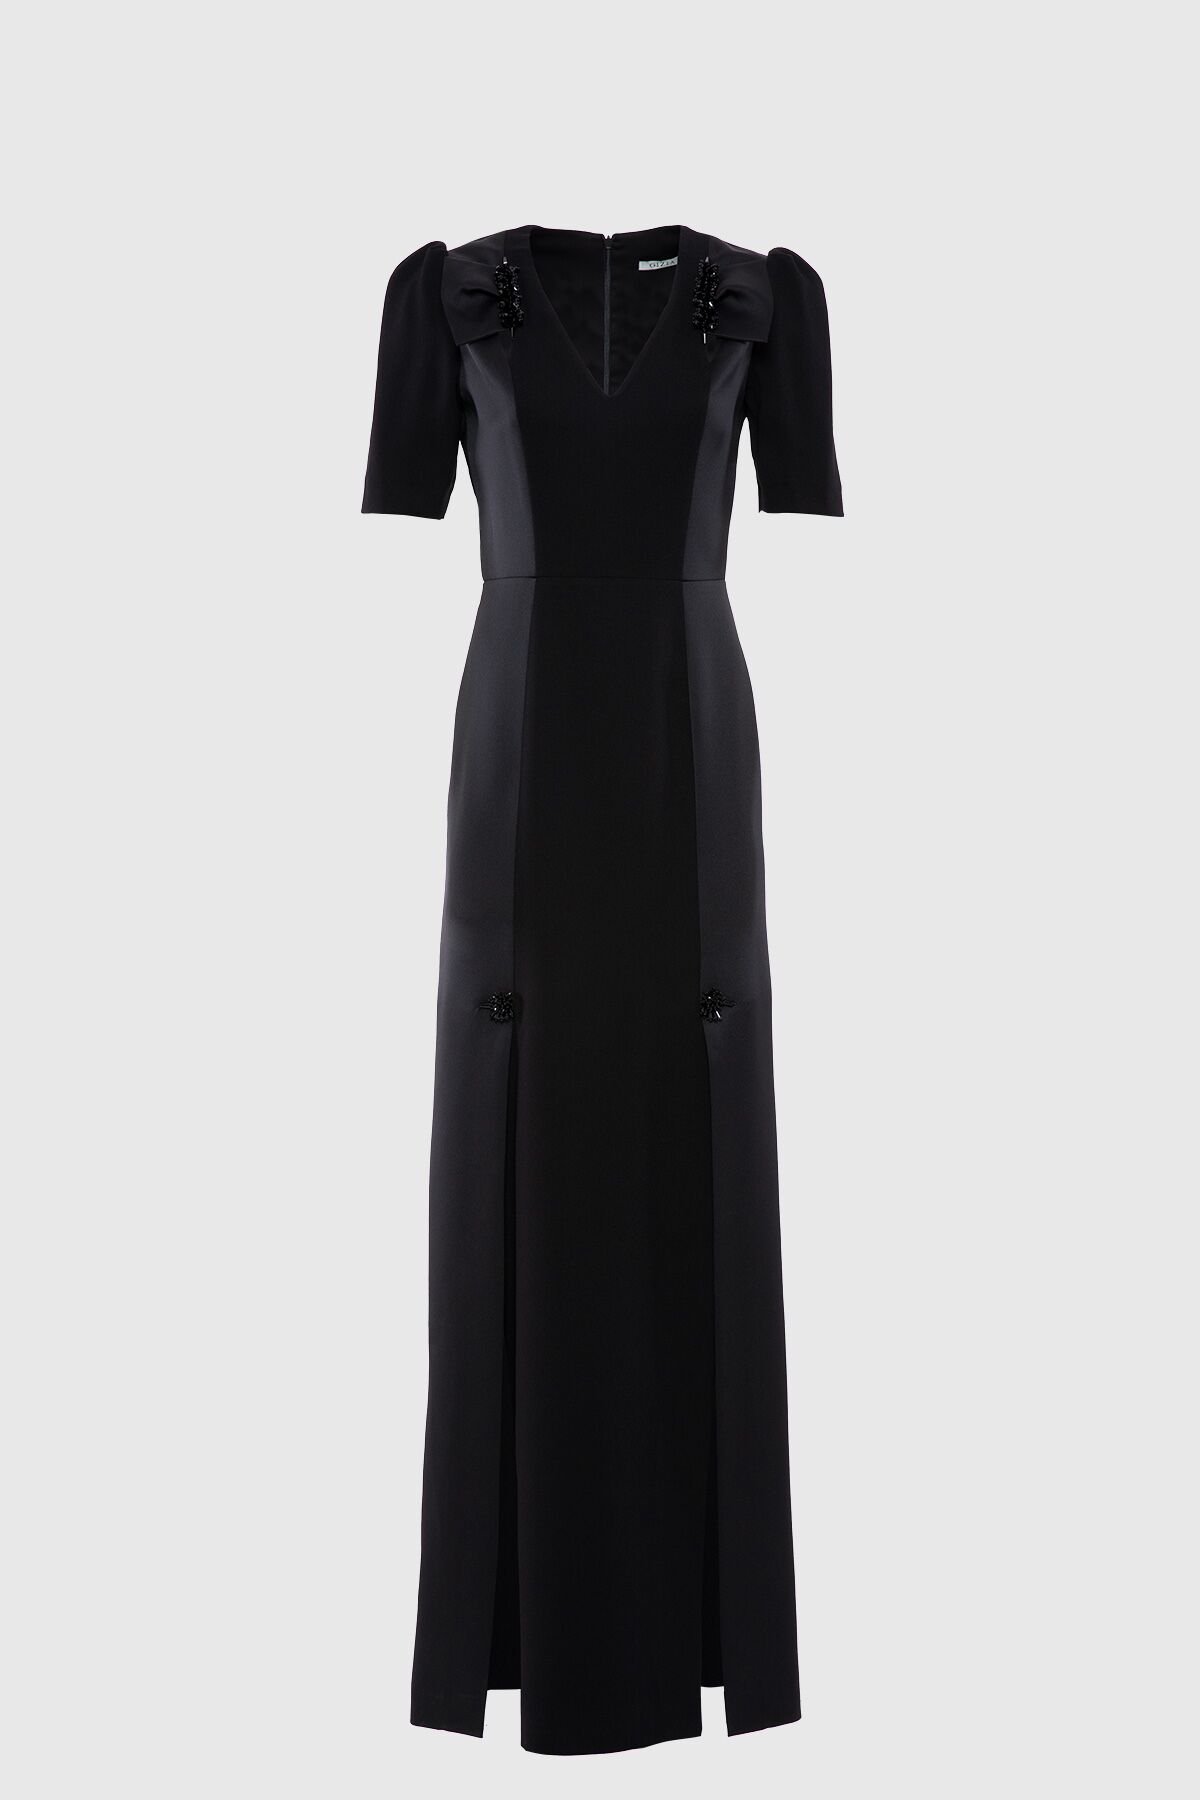 Front Double Slit Embroidered Detailed Black Evening Dress